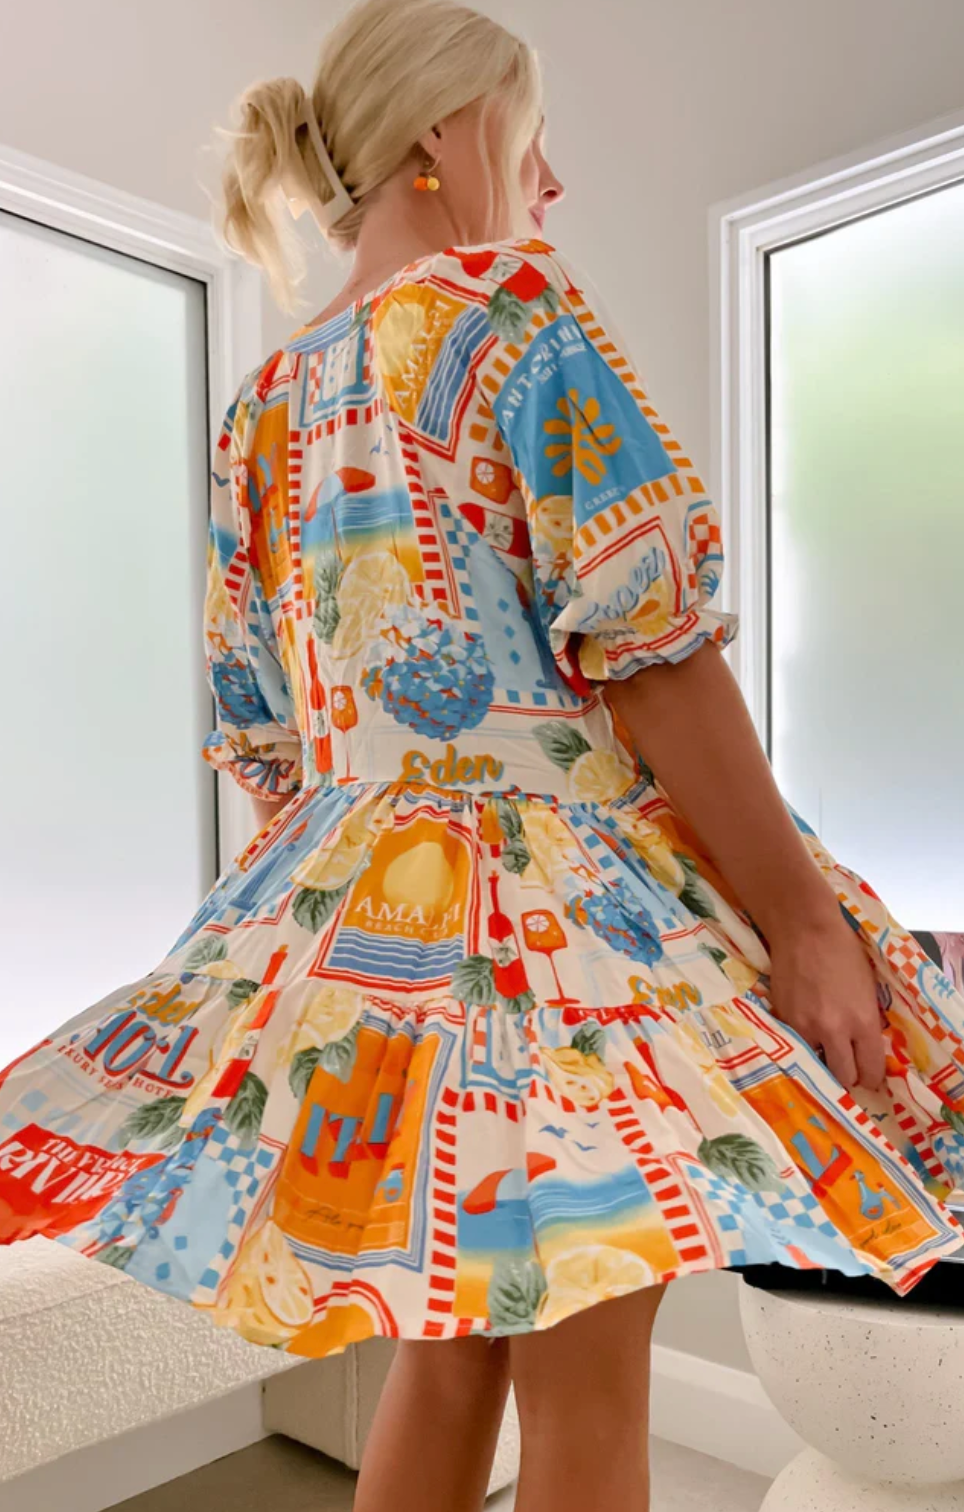 Introducing the Petal Mini Dress in the vibrant Sun Lounger Print! This dress features a flattering V neckline, a tiered smock style for a flowy fit, and 1/2 balloon sleeves with elasticated cuffs and frill detail. Embrace your playful and feminine side with this must-have dress!